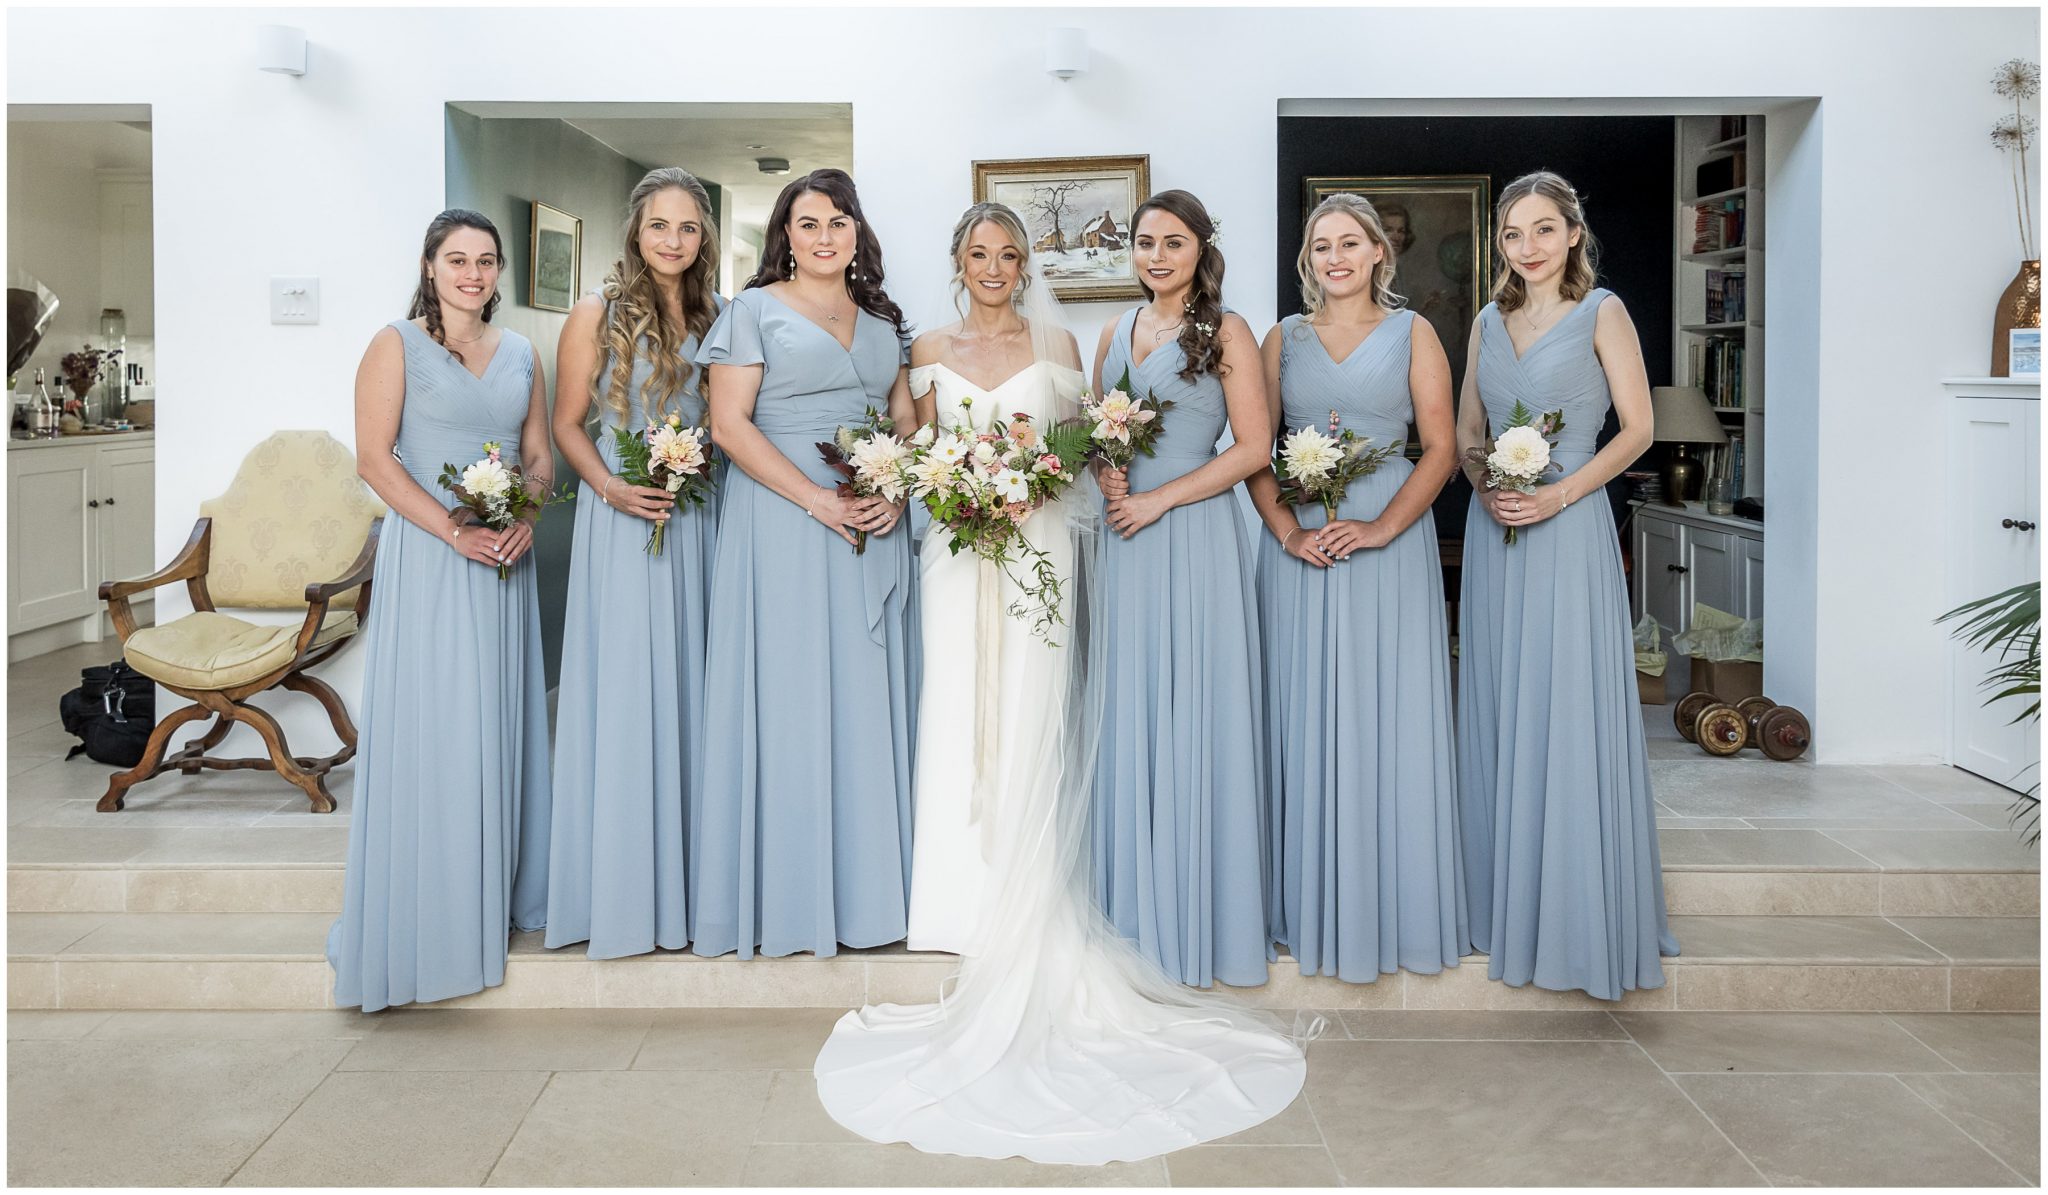 Bride with bridesmaids before heading off to the ceremony